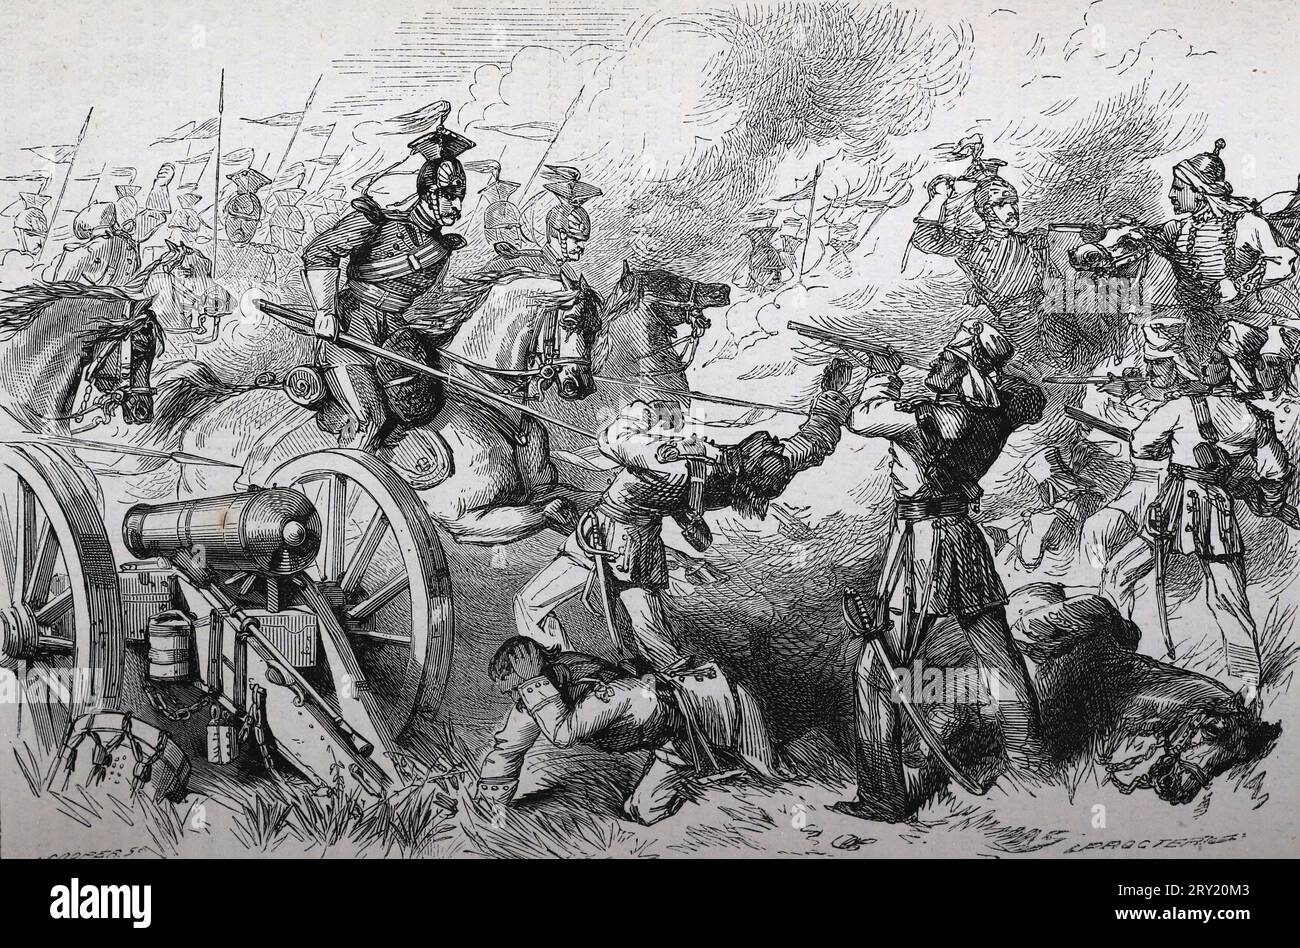 The capture of rebel guns by the cavalry of Roberts' brigade, 1857. The capture of Indian Rebel cannons by Lieutenant (later Field Marshal) Frederick Sleigh Roberts, 1st Earl Roberts, VC (1832-1914) during the Indian Mutiny (First War of Indian Independence). Black and White Illustration Stock Photo